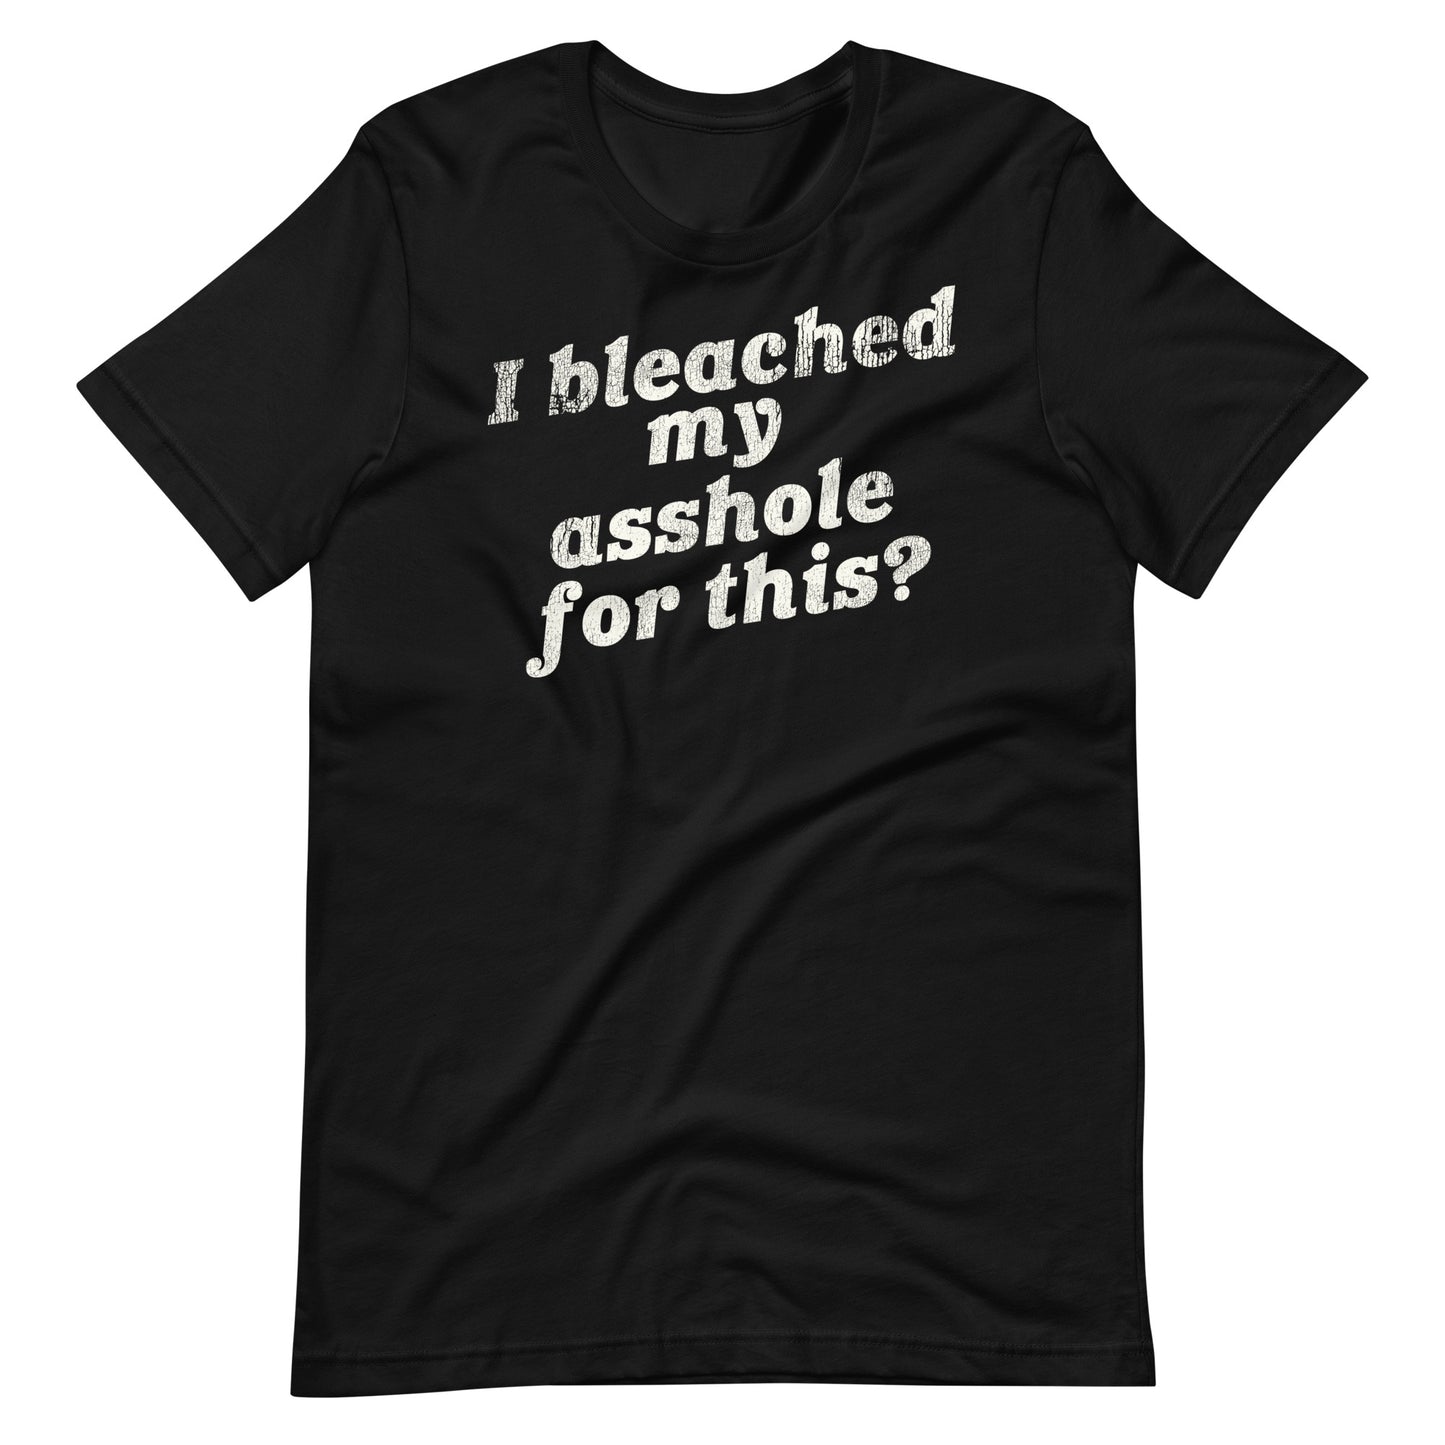 I Bleached My Asshole for This? Unisex T-Shirt